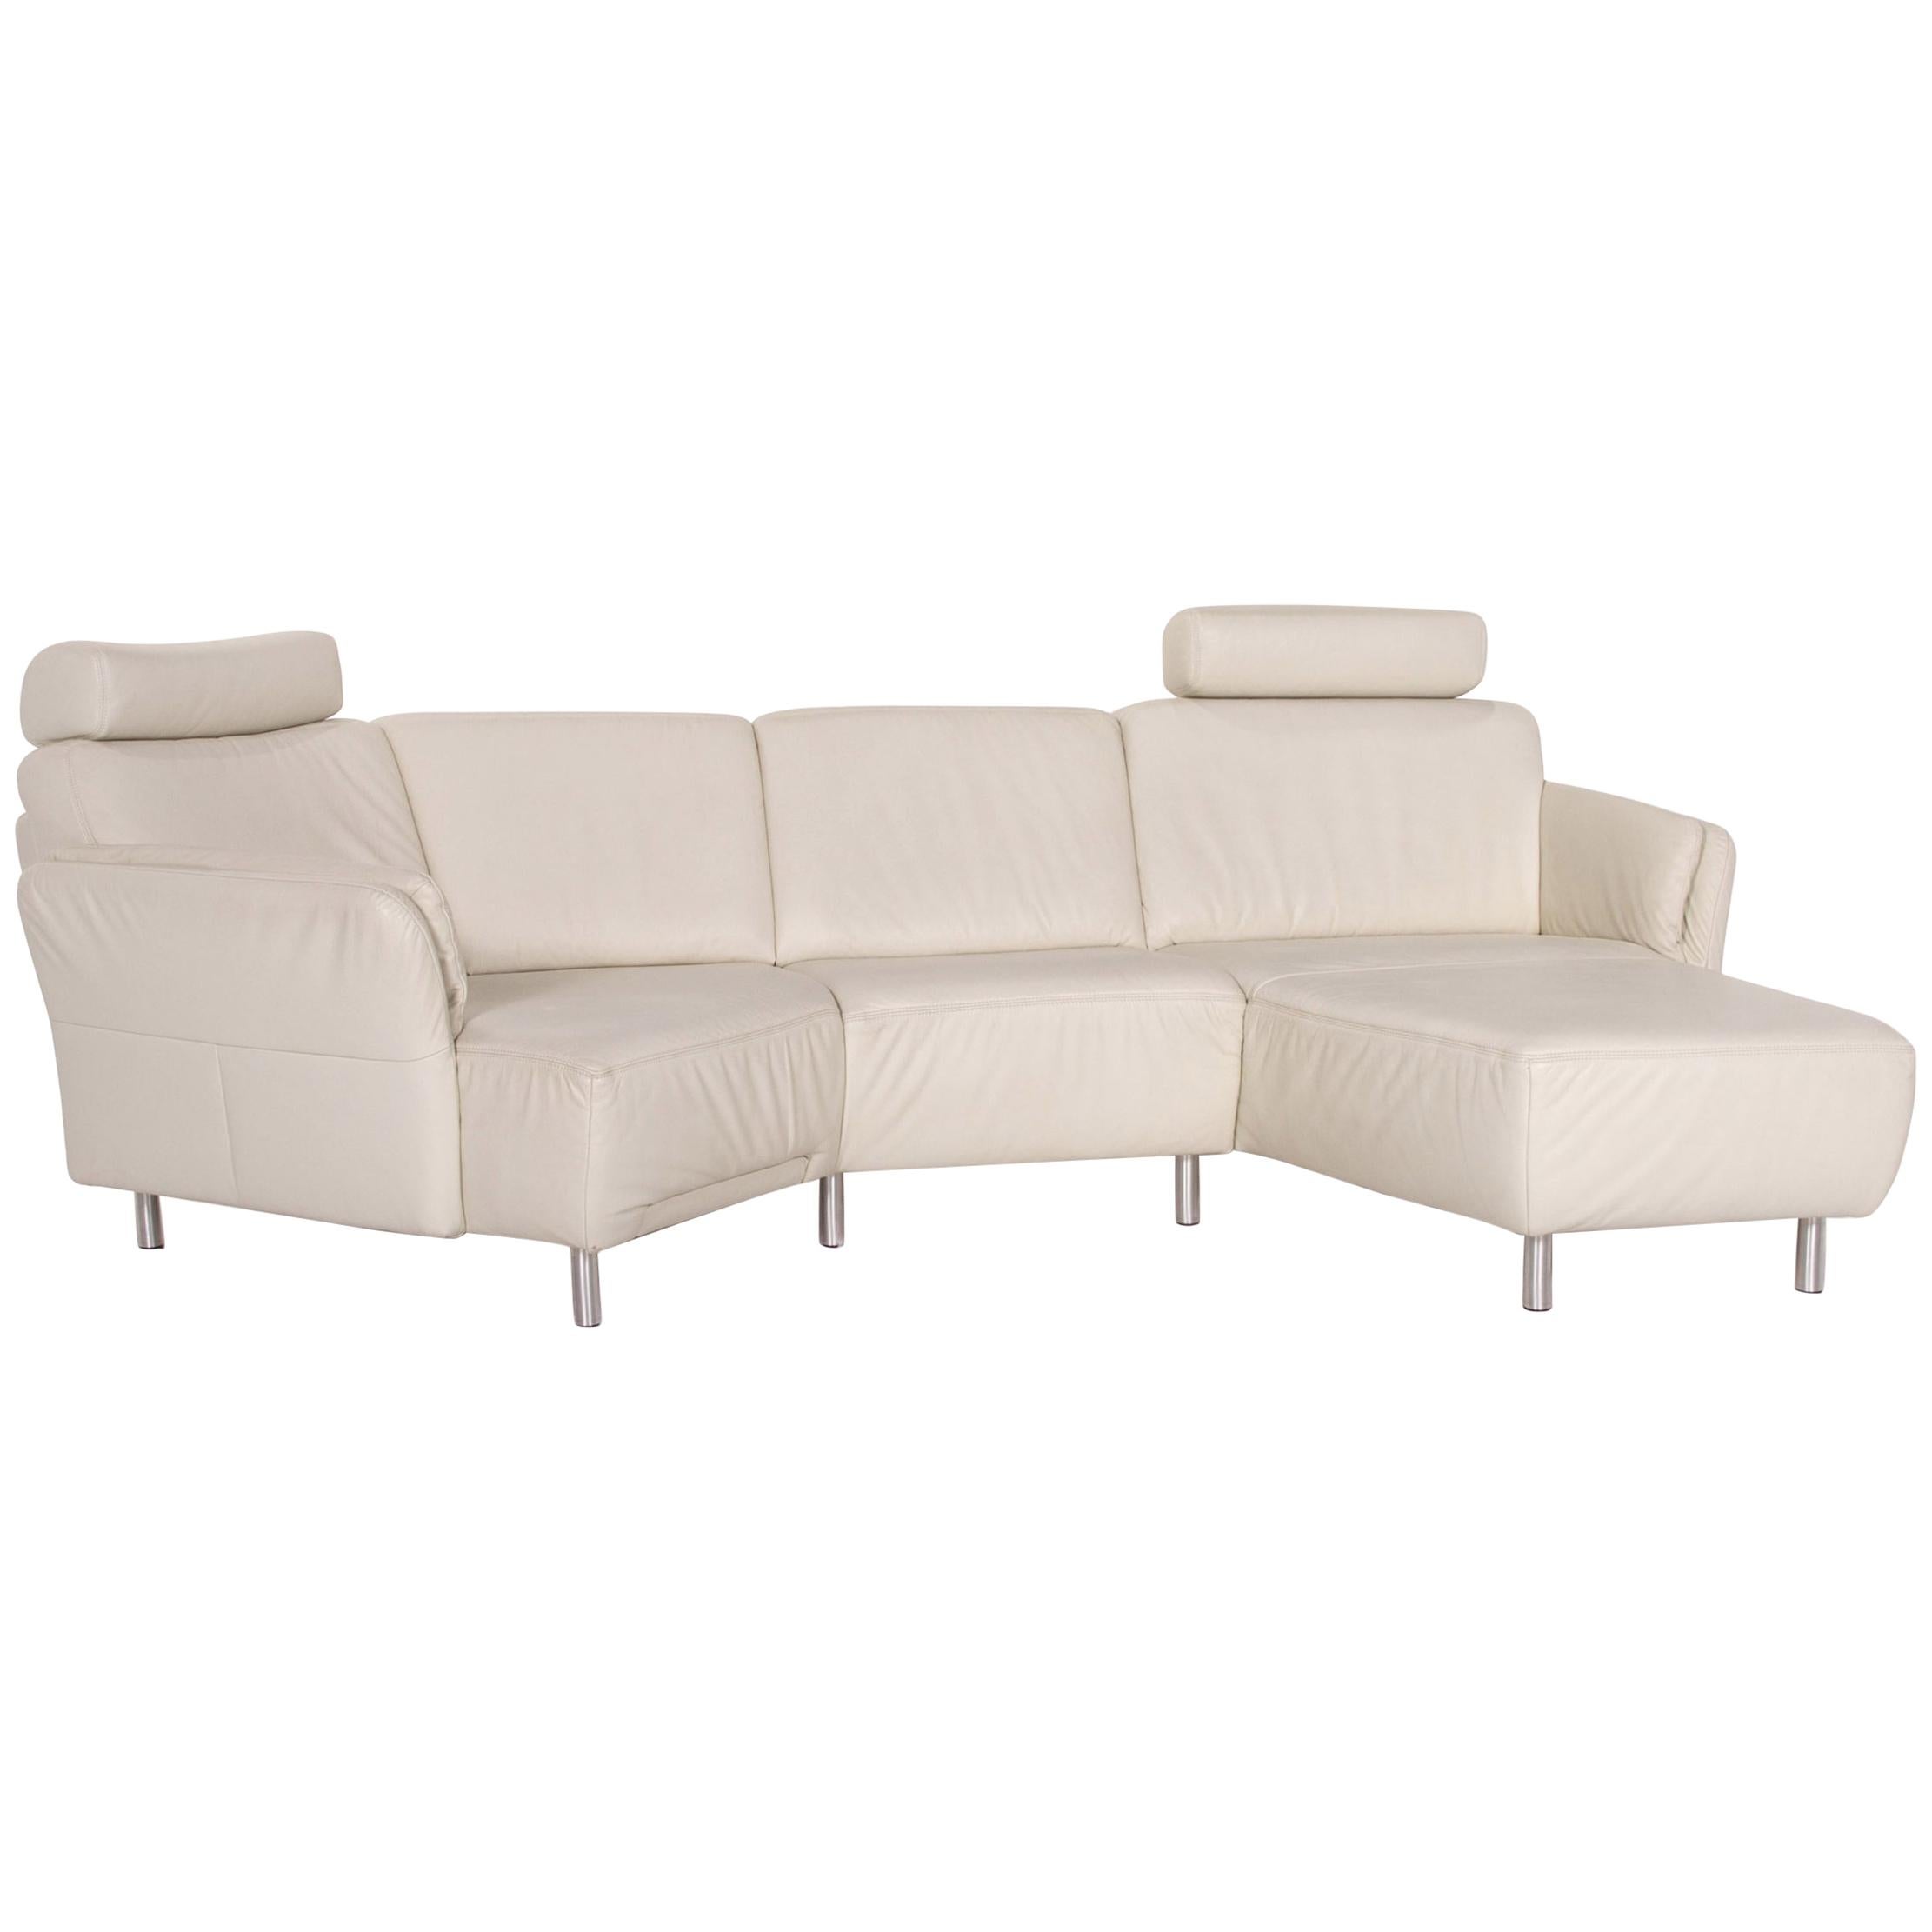 Sample Ring Leather Corner Sofa Cream Sofa Couch For Sale